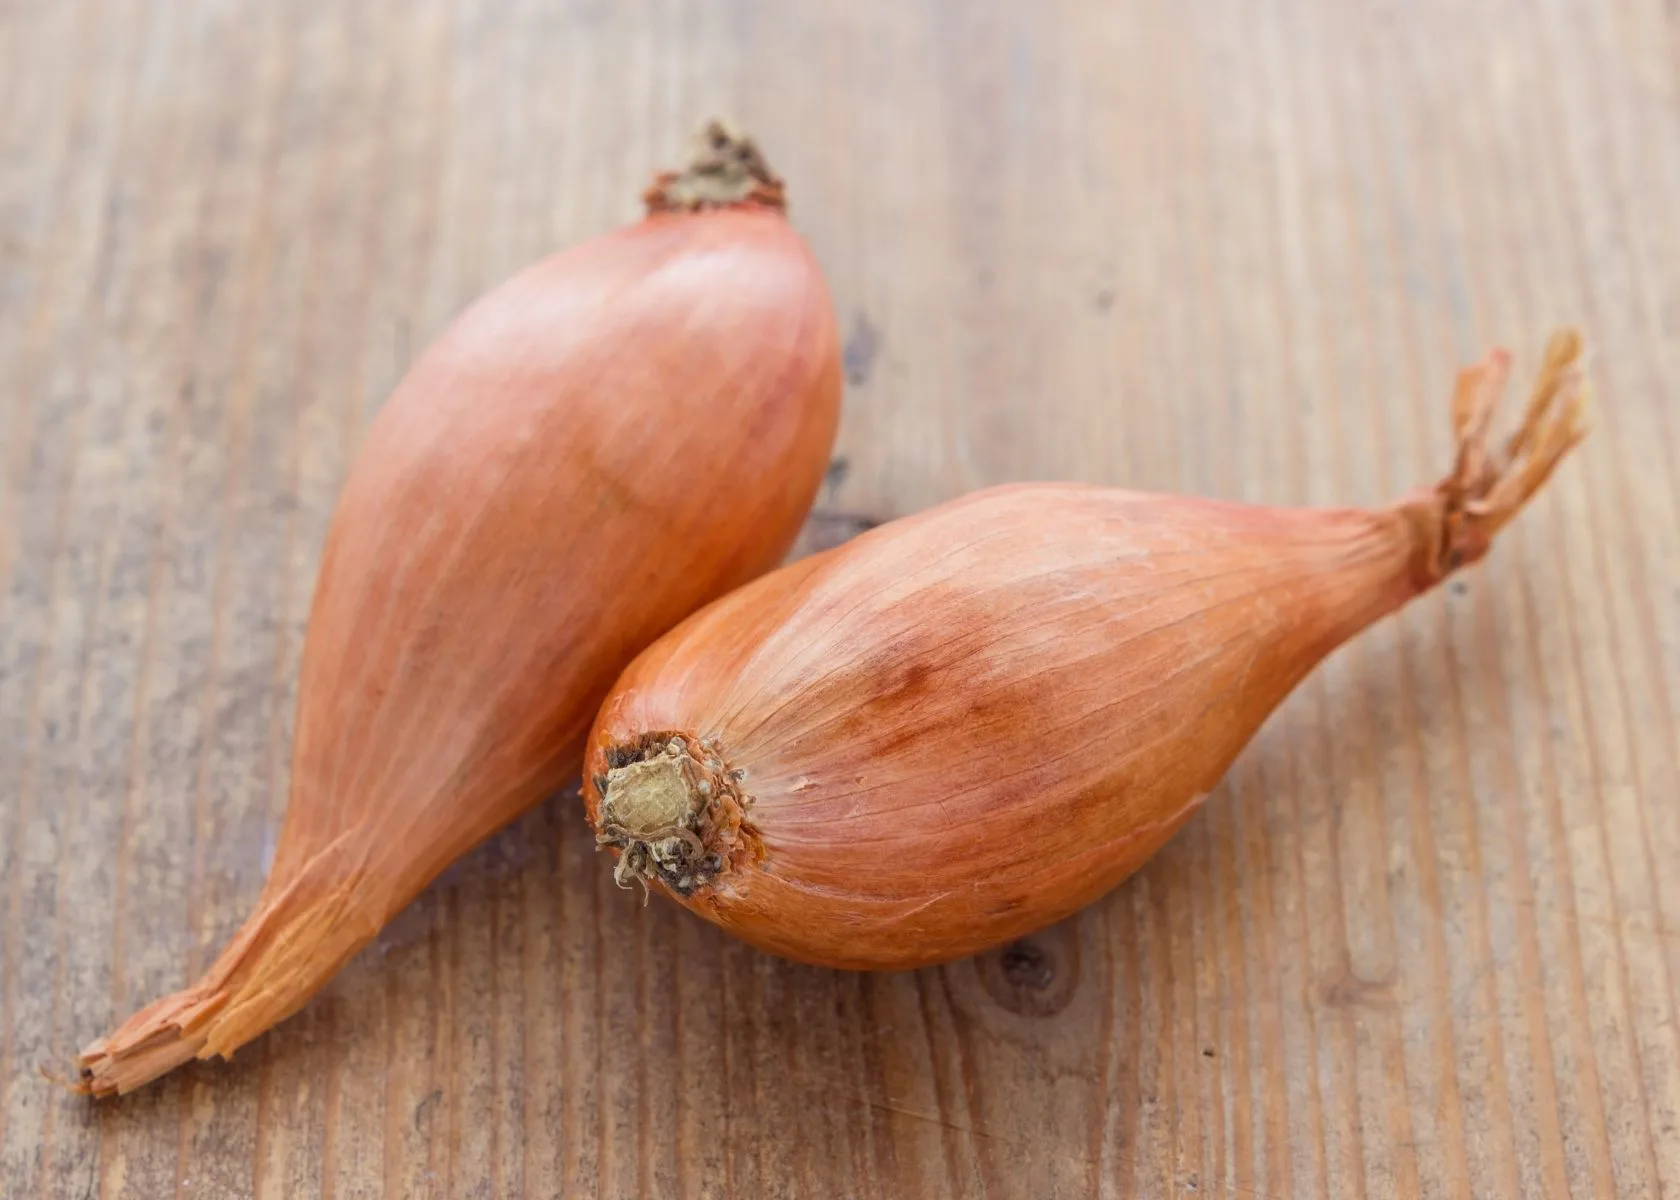 Two fresh large unpeeled shallots sit on a rustic wooden table surface.